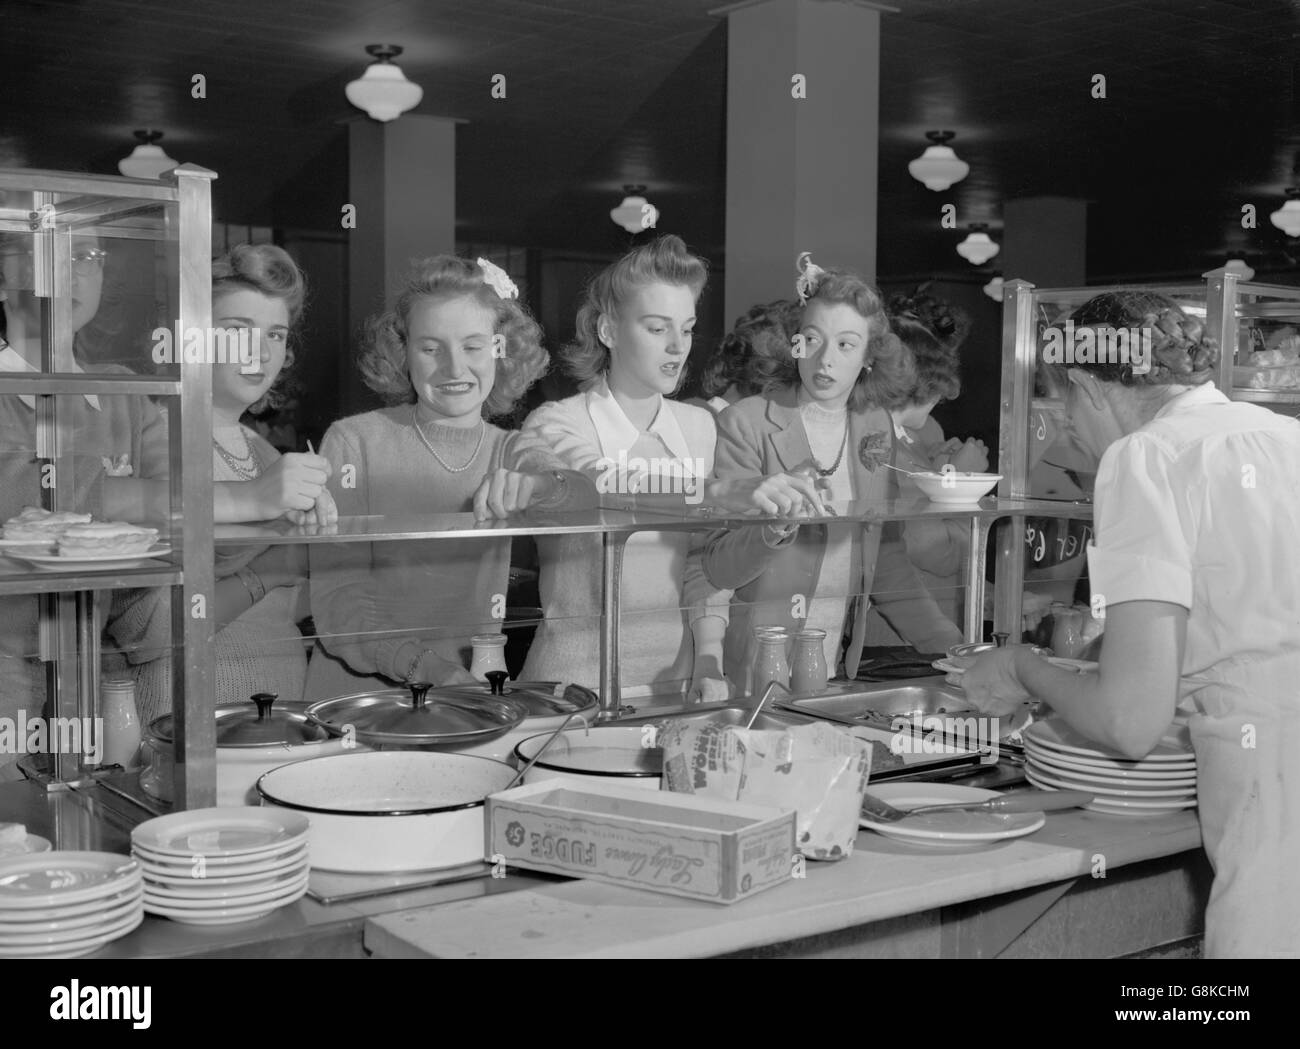 Teenage Girls at Cafeteria Counter, Woodrow Wilson High School, Washington DC, USA, Esther Bubley for Office of War Information, October 1943 Stock Photo